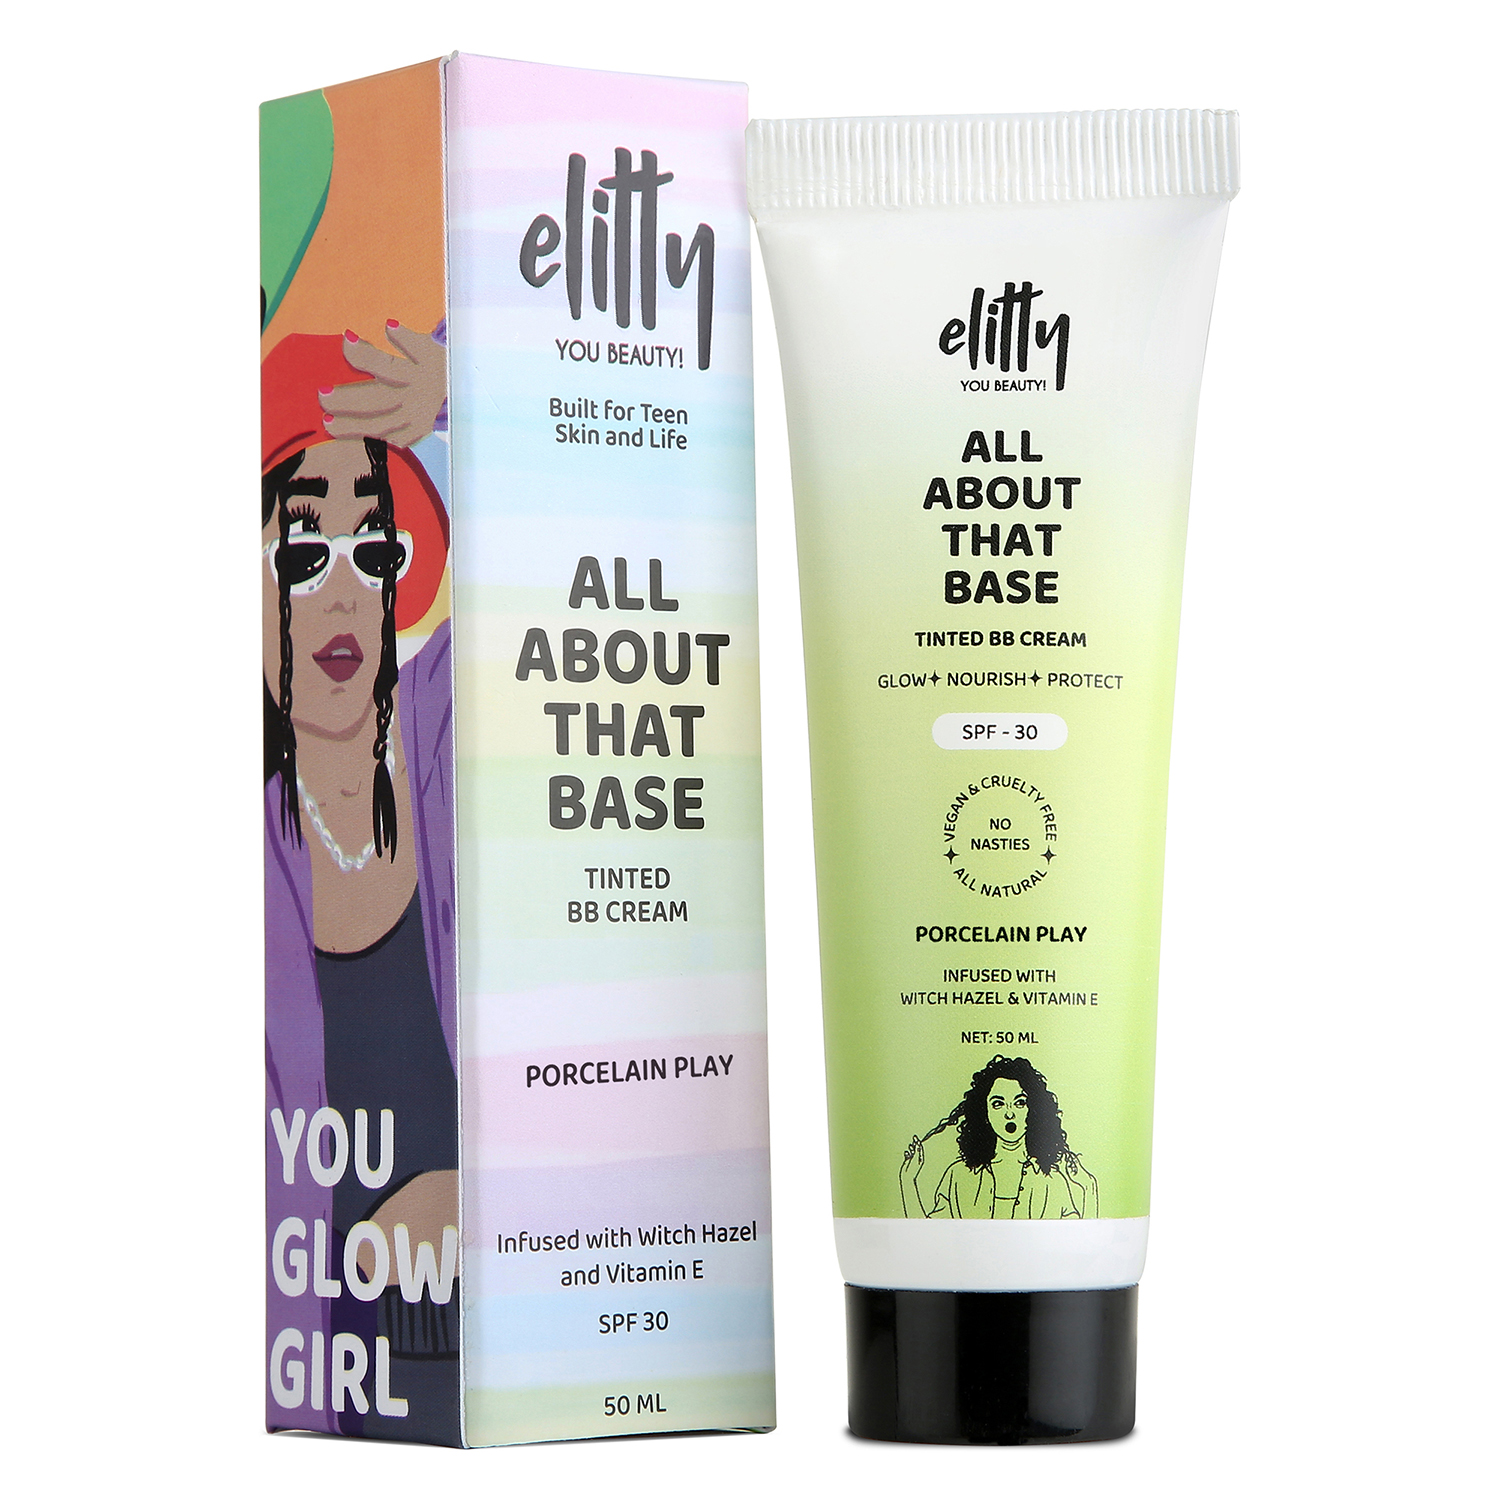 Elitty All About That Base Tinted BB Cream With SPF 30, 50ml-Porcelain Play (Light)